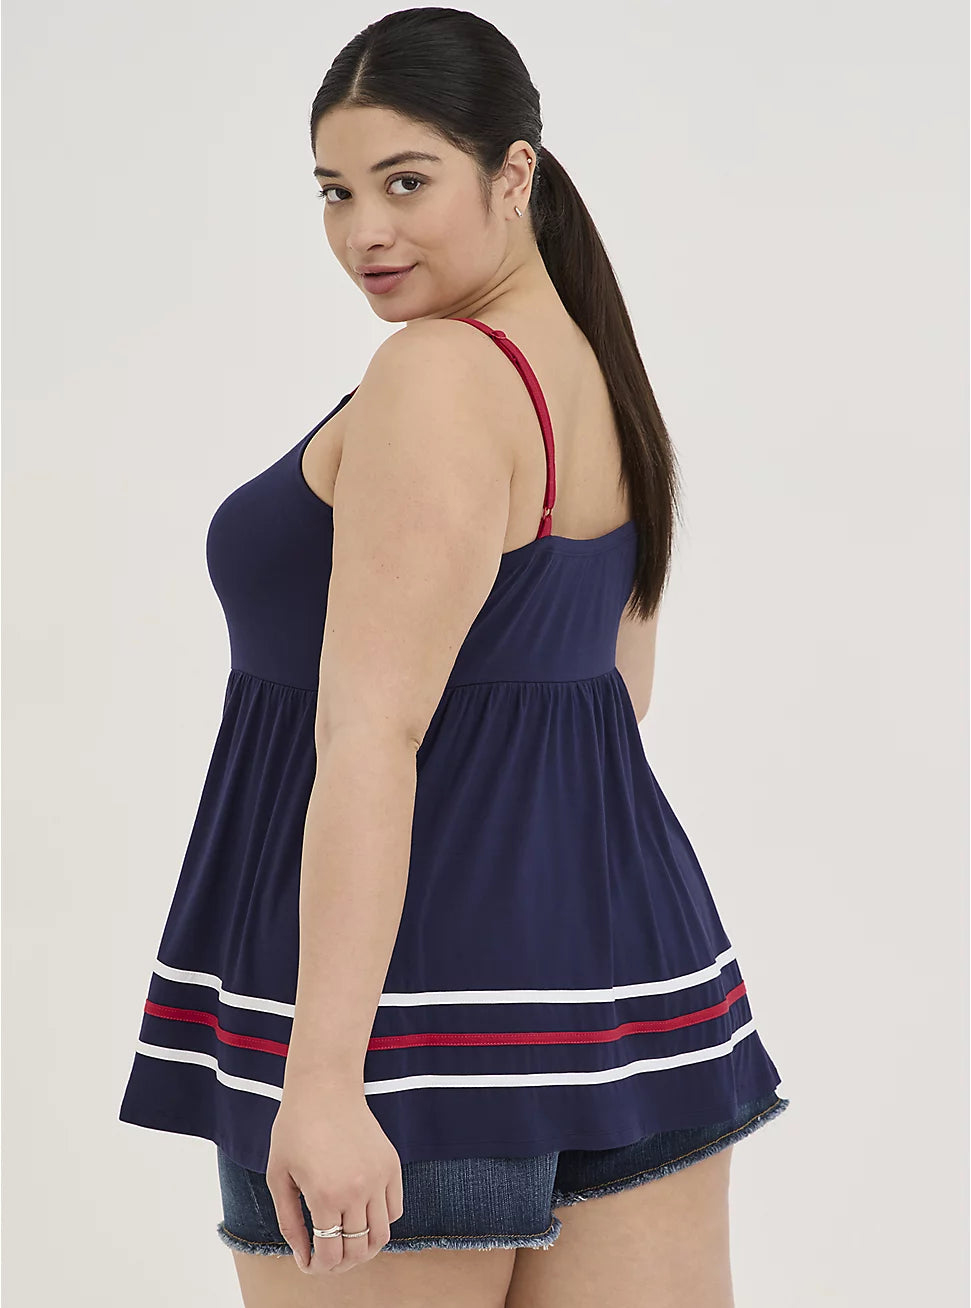 Torrid Babydoll Navy Blue and Red Sleeveless Top NWT - 3XL